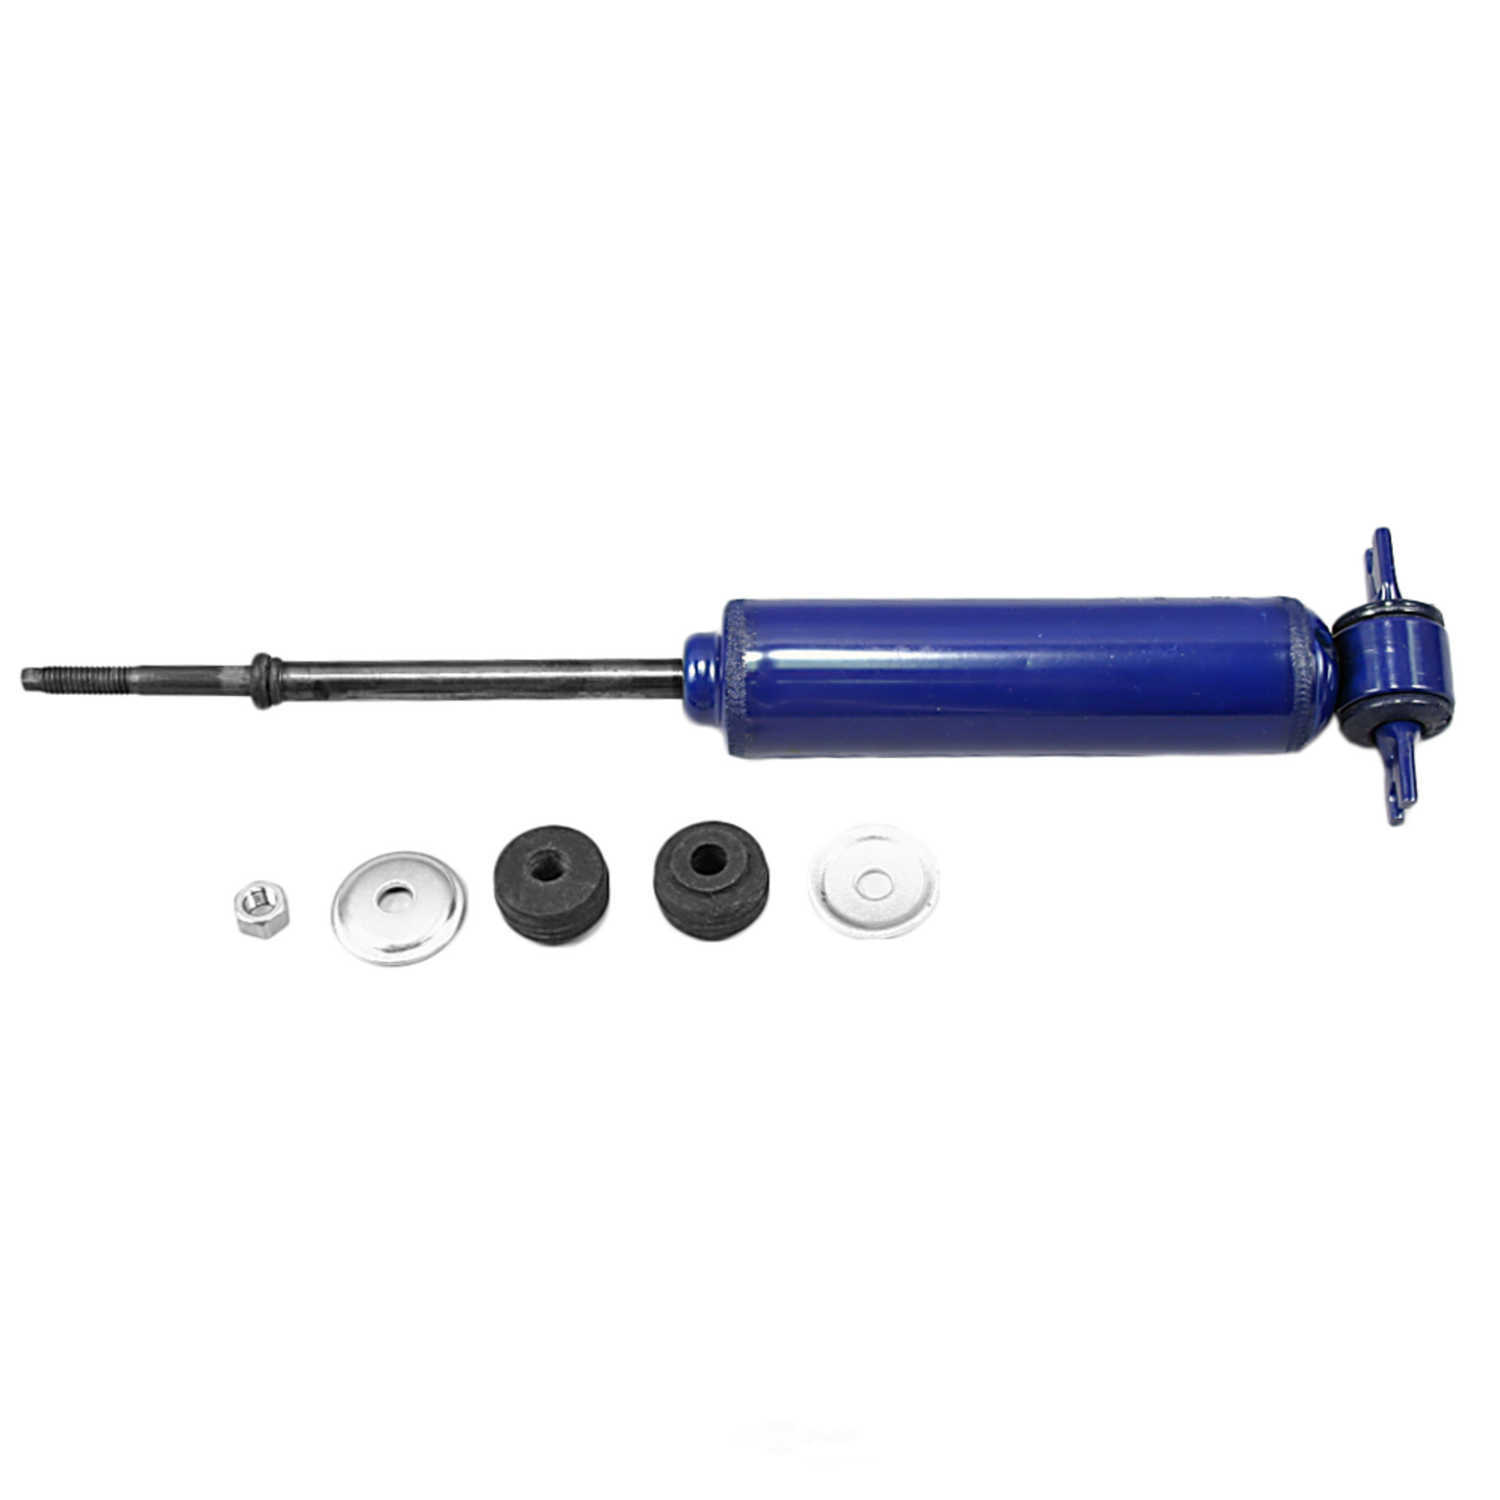 MONROE SHOCKS/STRUTS - Monro-Matic Plus Shock Absorber (With ABS Brakes, Front) - MOE 32127